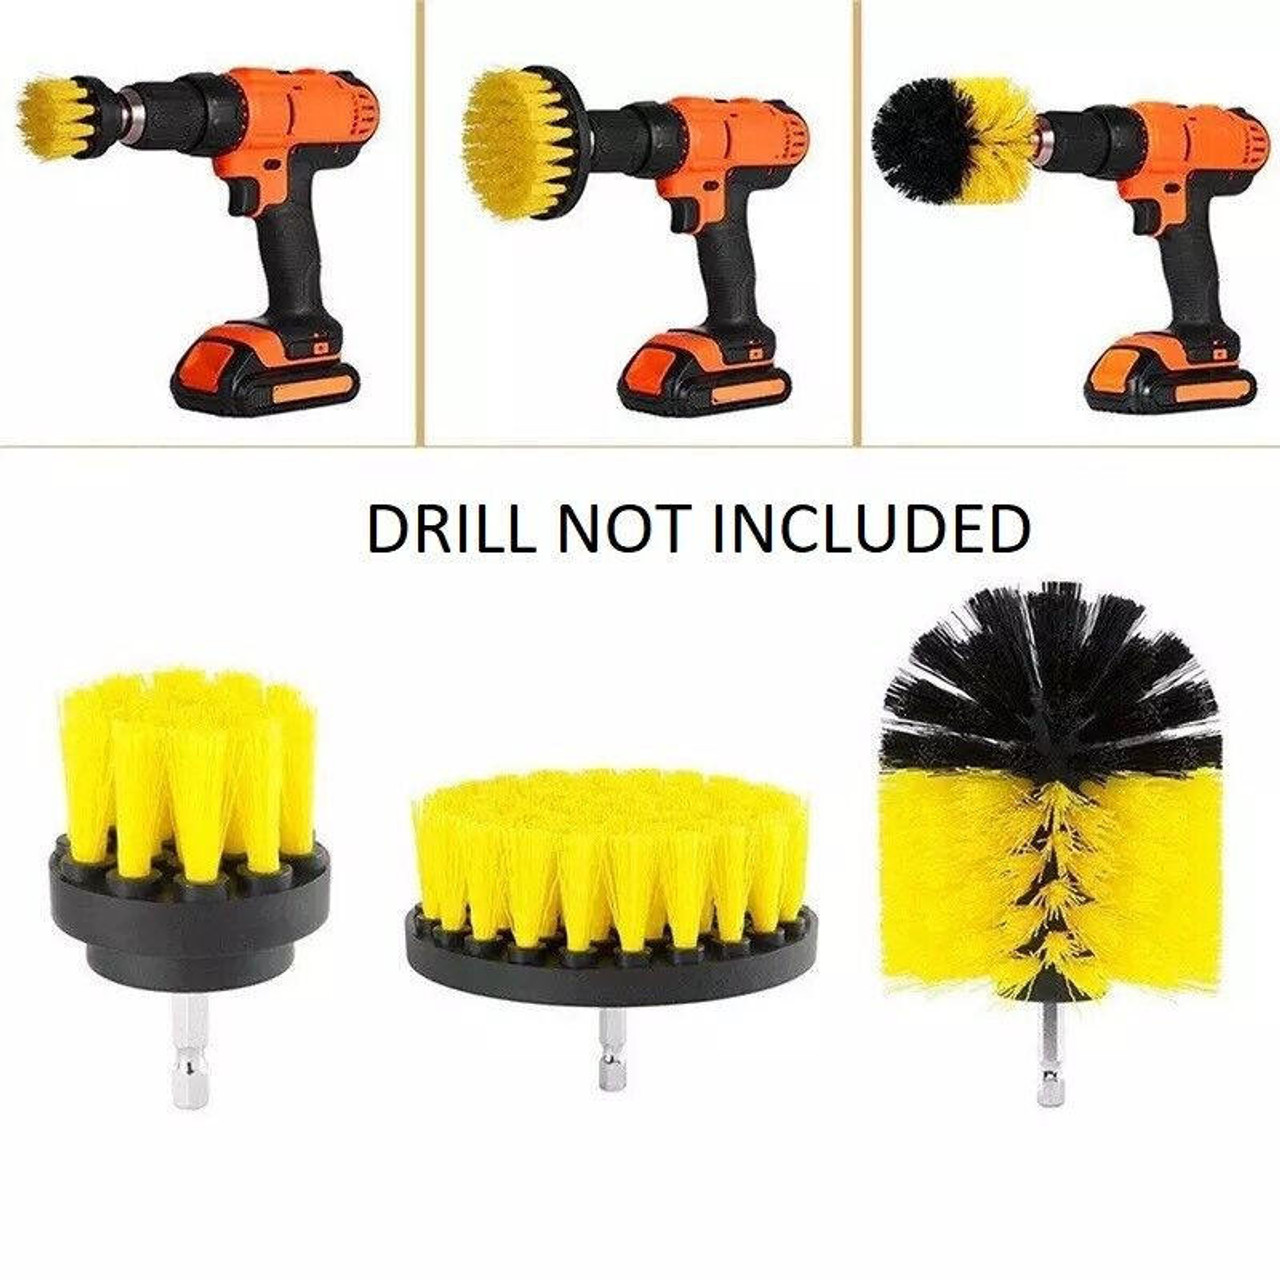 https://cdn11.bigcommerce.com/s-zrh8tkpr8d/images/stencil/1280x1280/products/9953/33385/3pcs-drill-brush-power-scrubber-drill-attachments-for-carpet-tile-grout-cleaning__34798.1665670707.jpg?c=2&imbypass=on